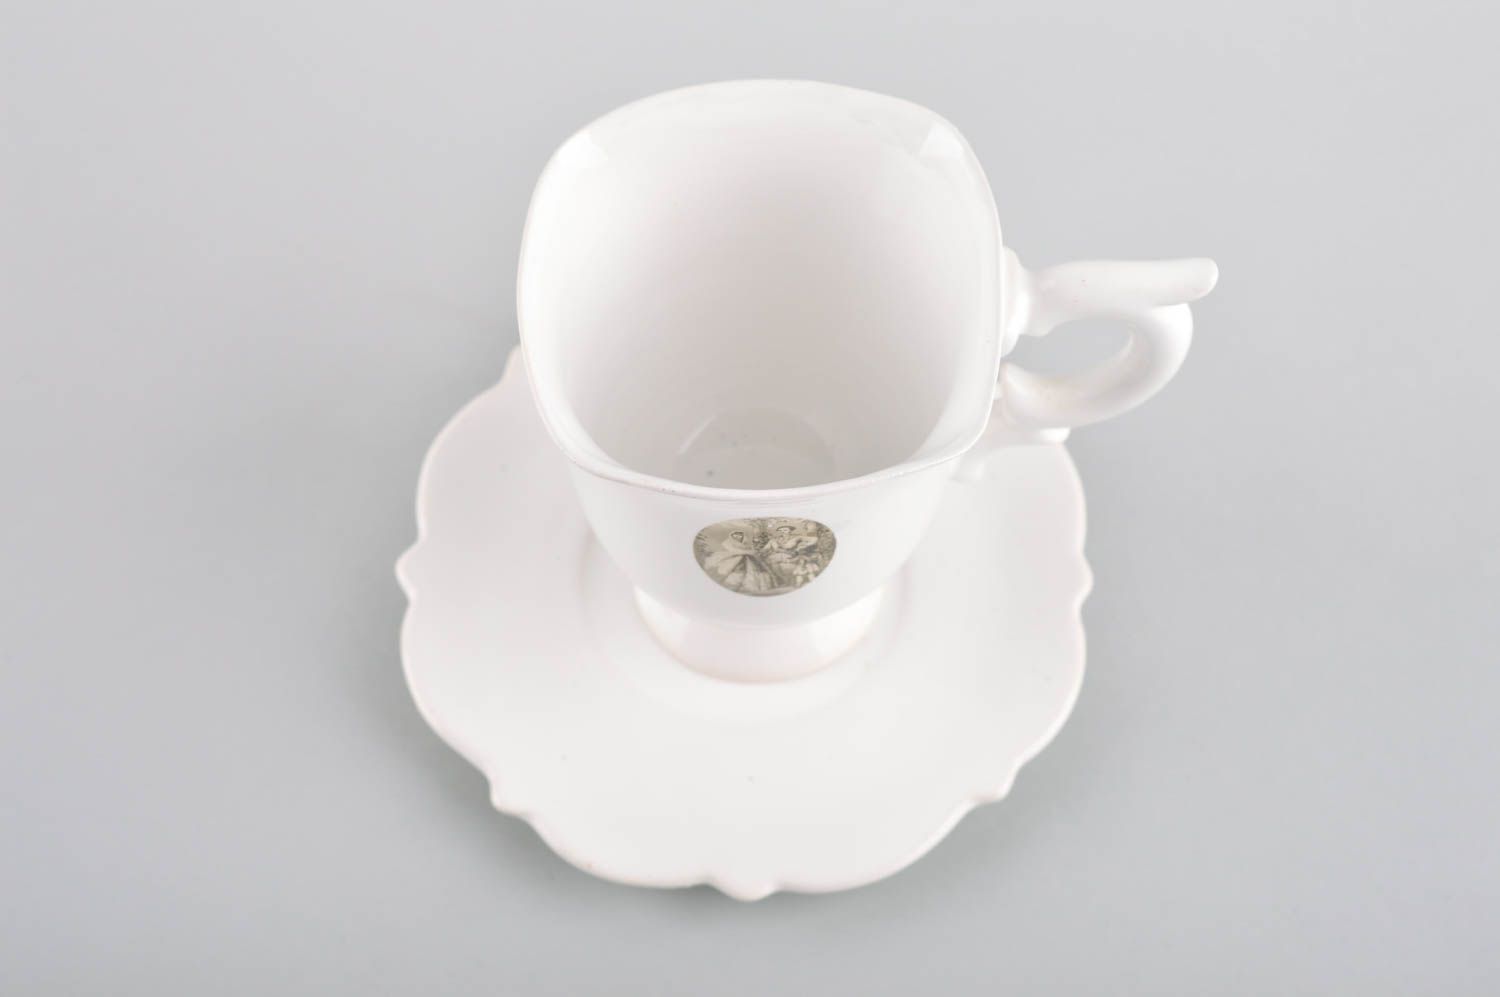 8 oz elegant white ceramic porcelain teacup with a handle on stand with saucer 0,82 lb photo 3